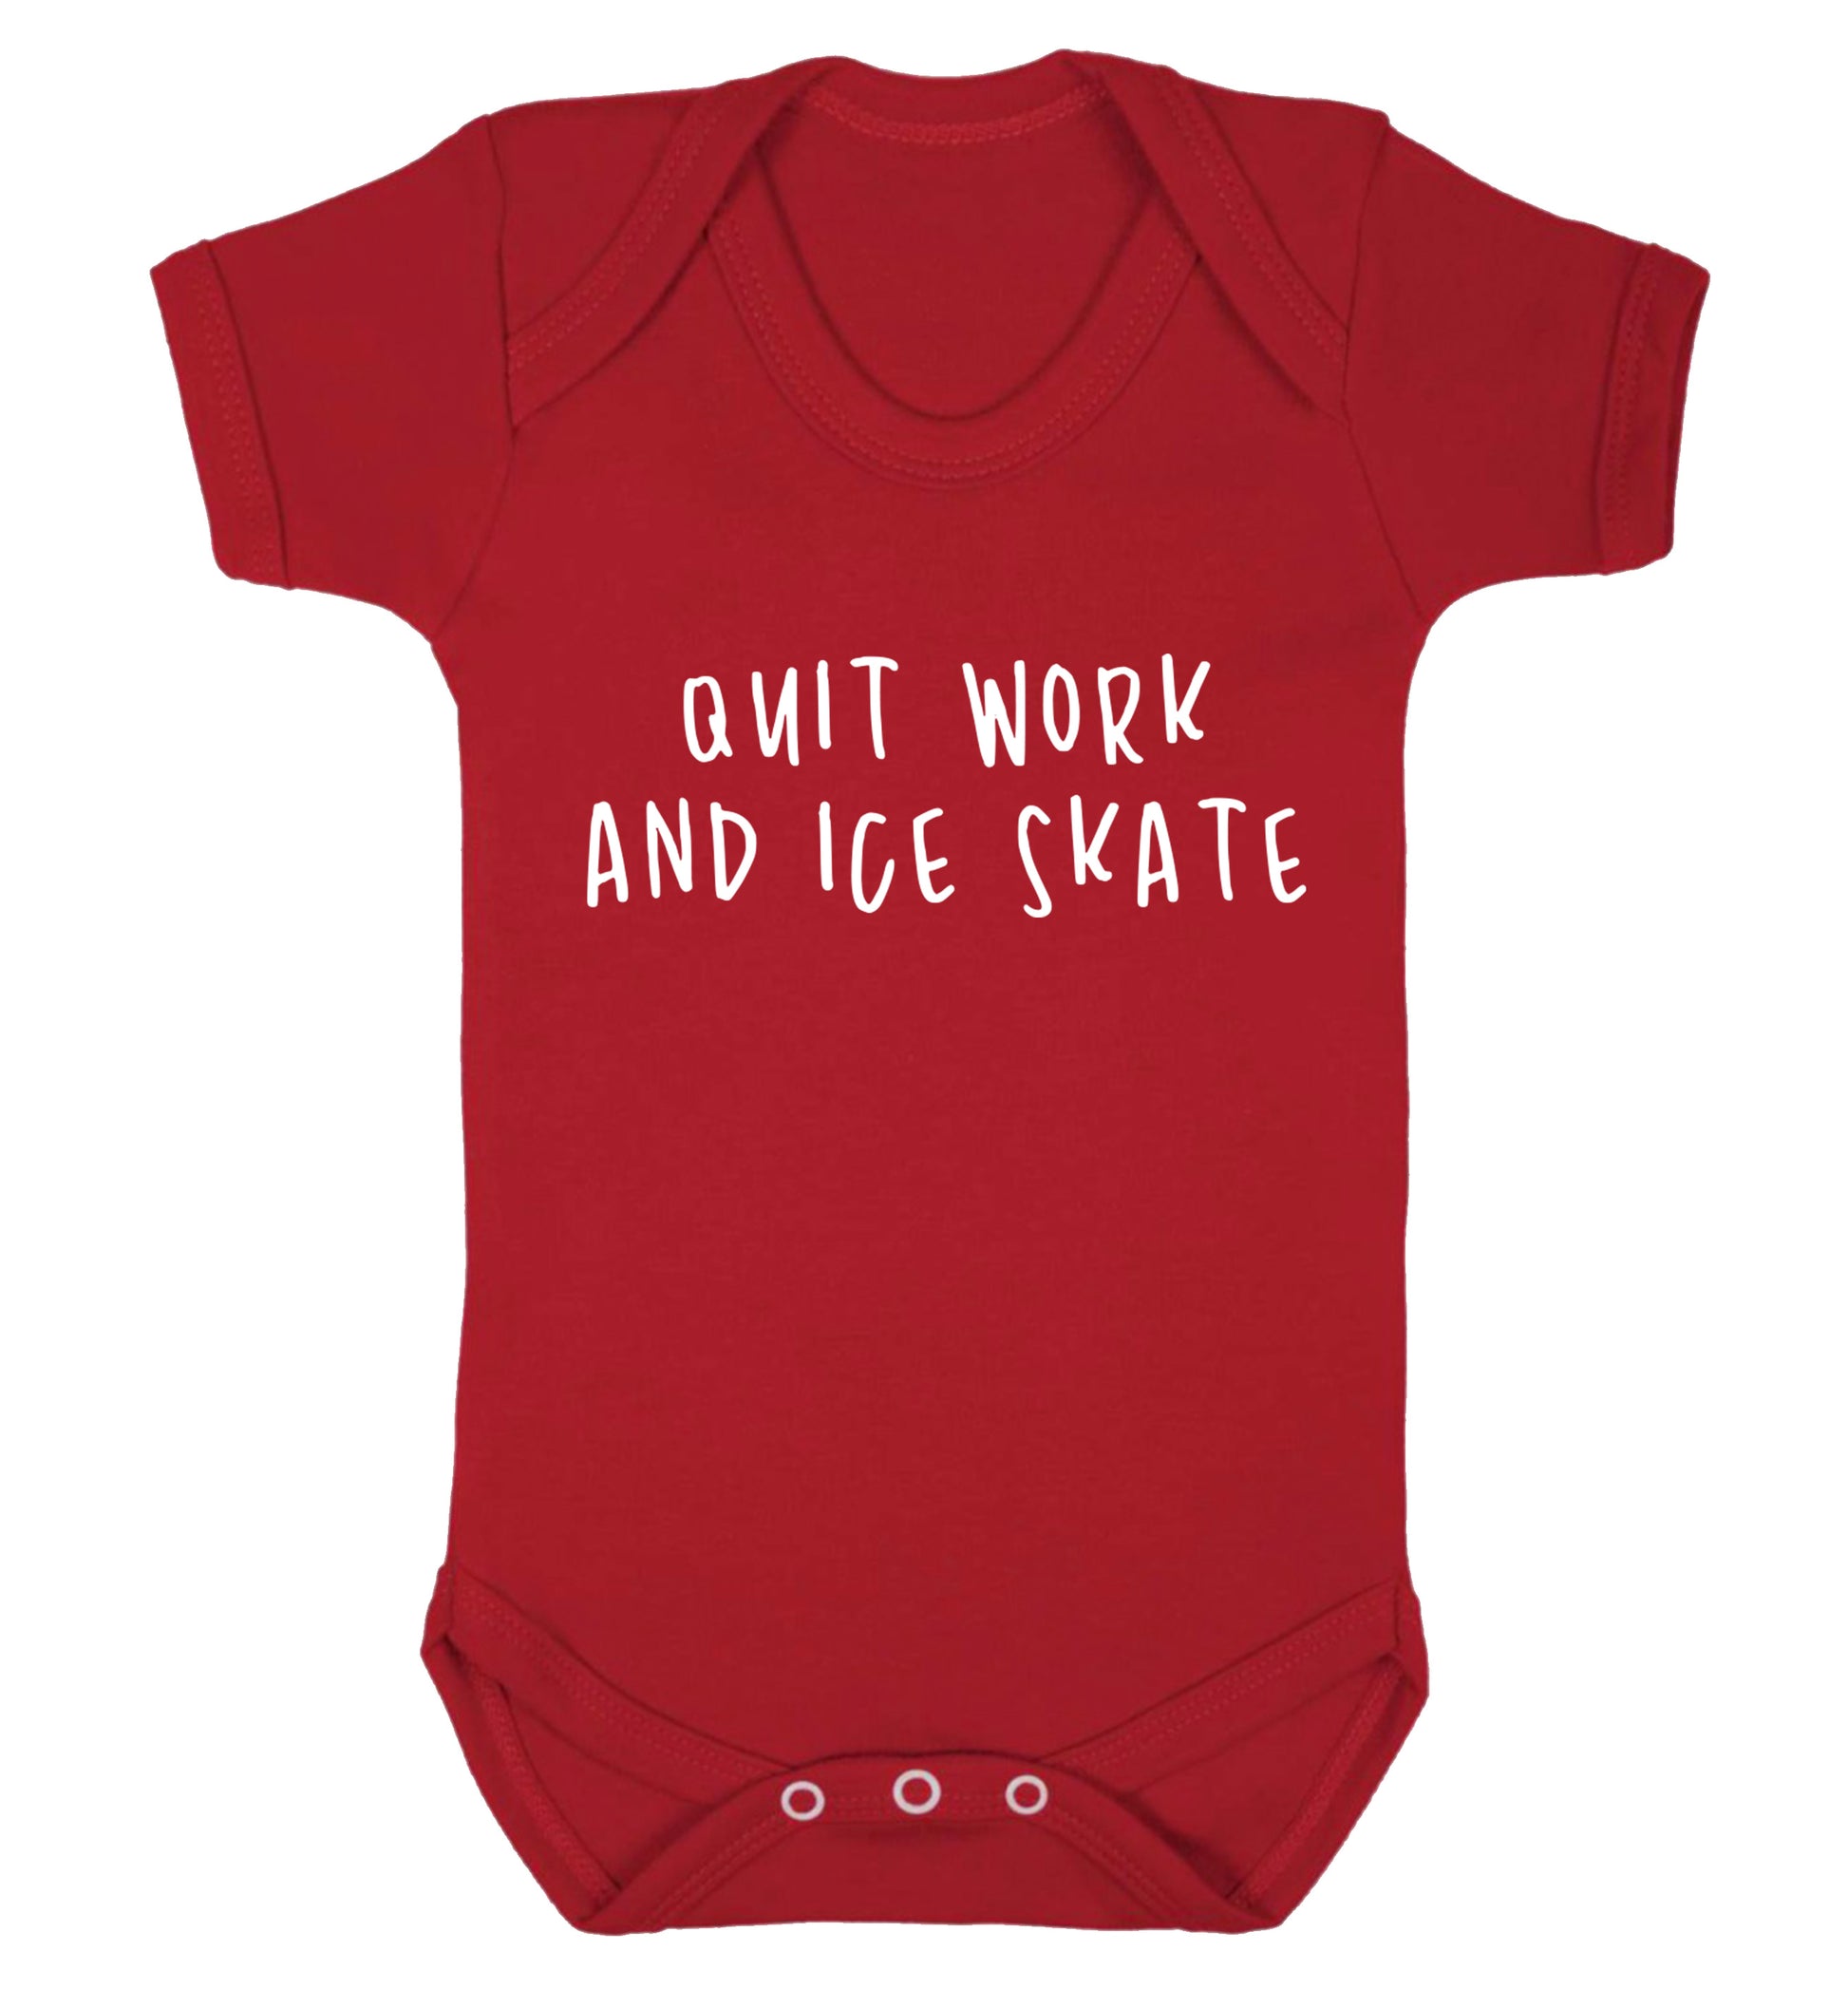 Quit work ice skate Baby Vest red 18-24 months